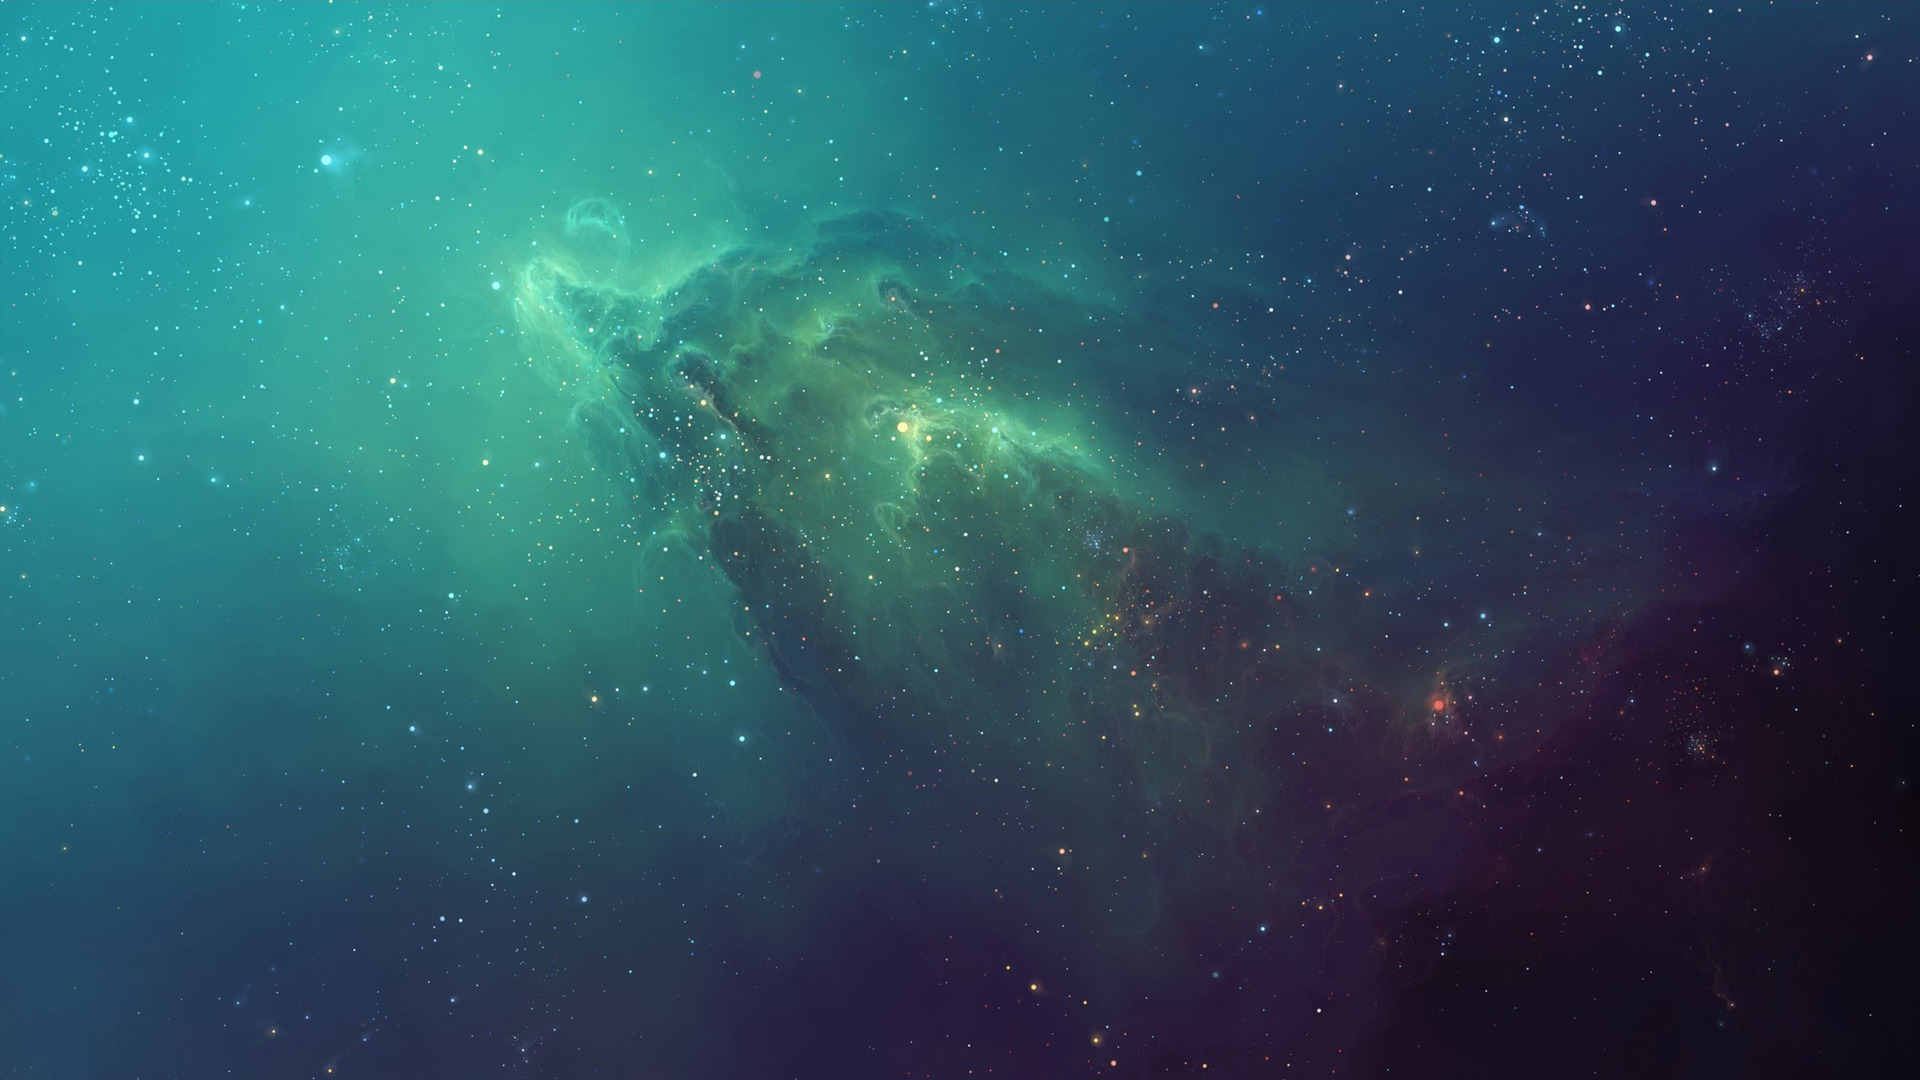 Space Wallpaper Nebula Hd Pictures Wallpapers Lzamgs 1920x1080px